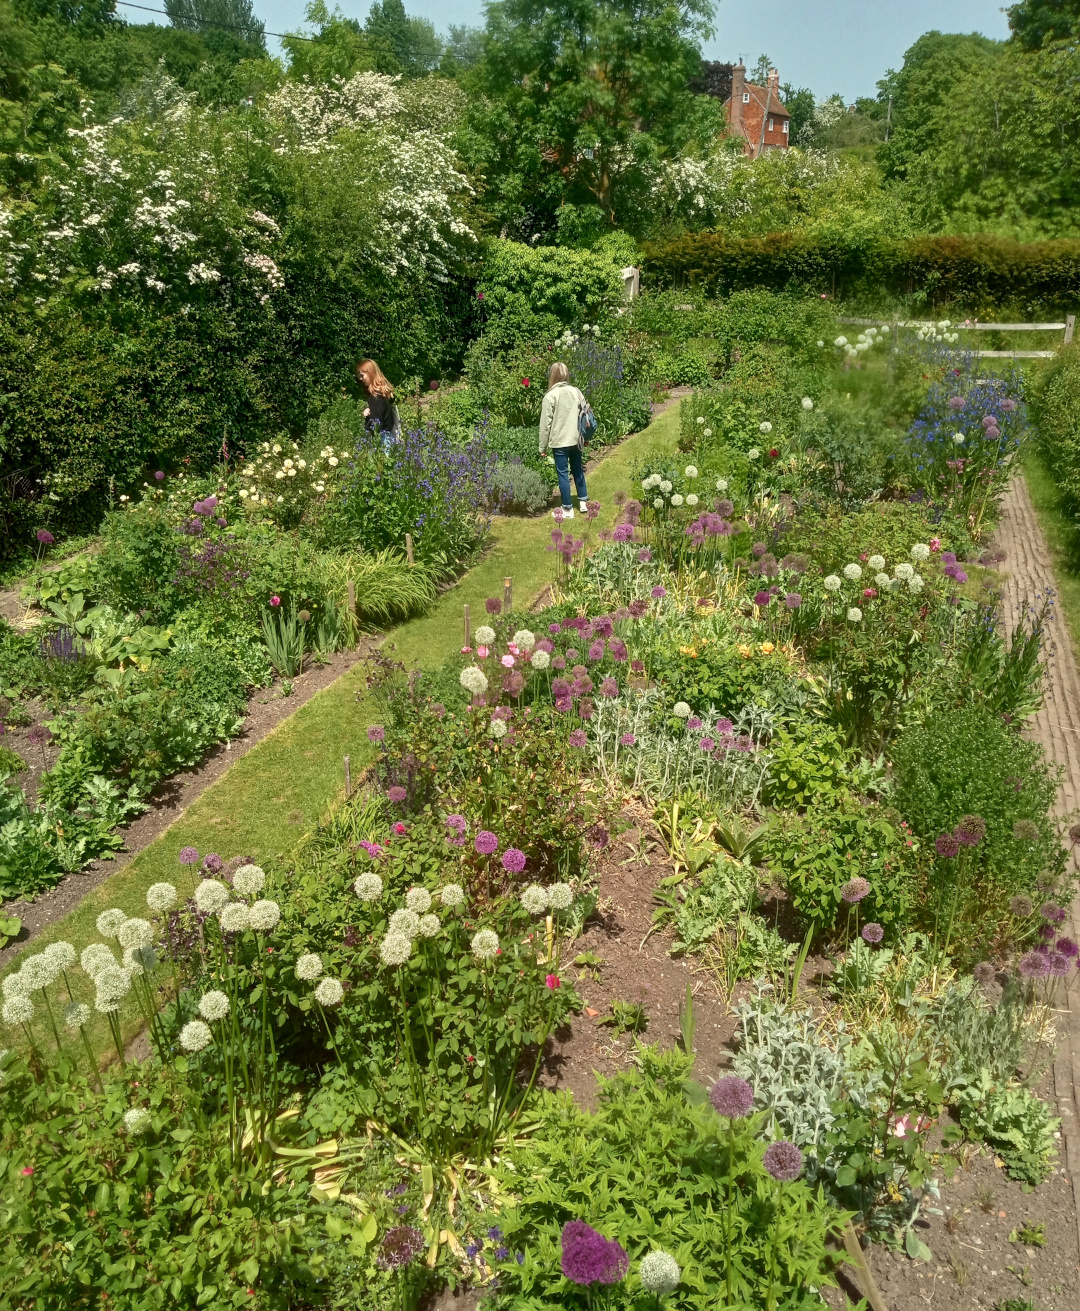 wide view of cottage garden with lots of flowers and grass paths